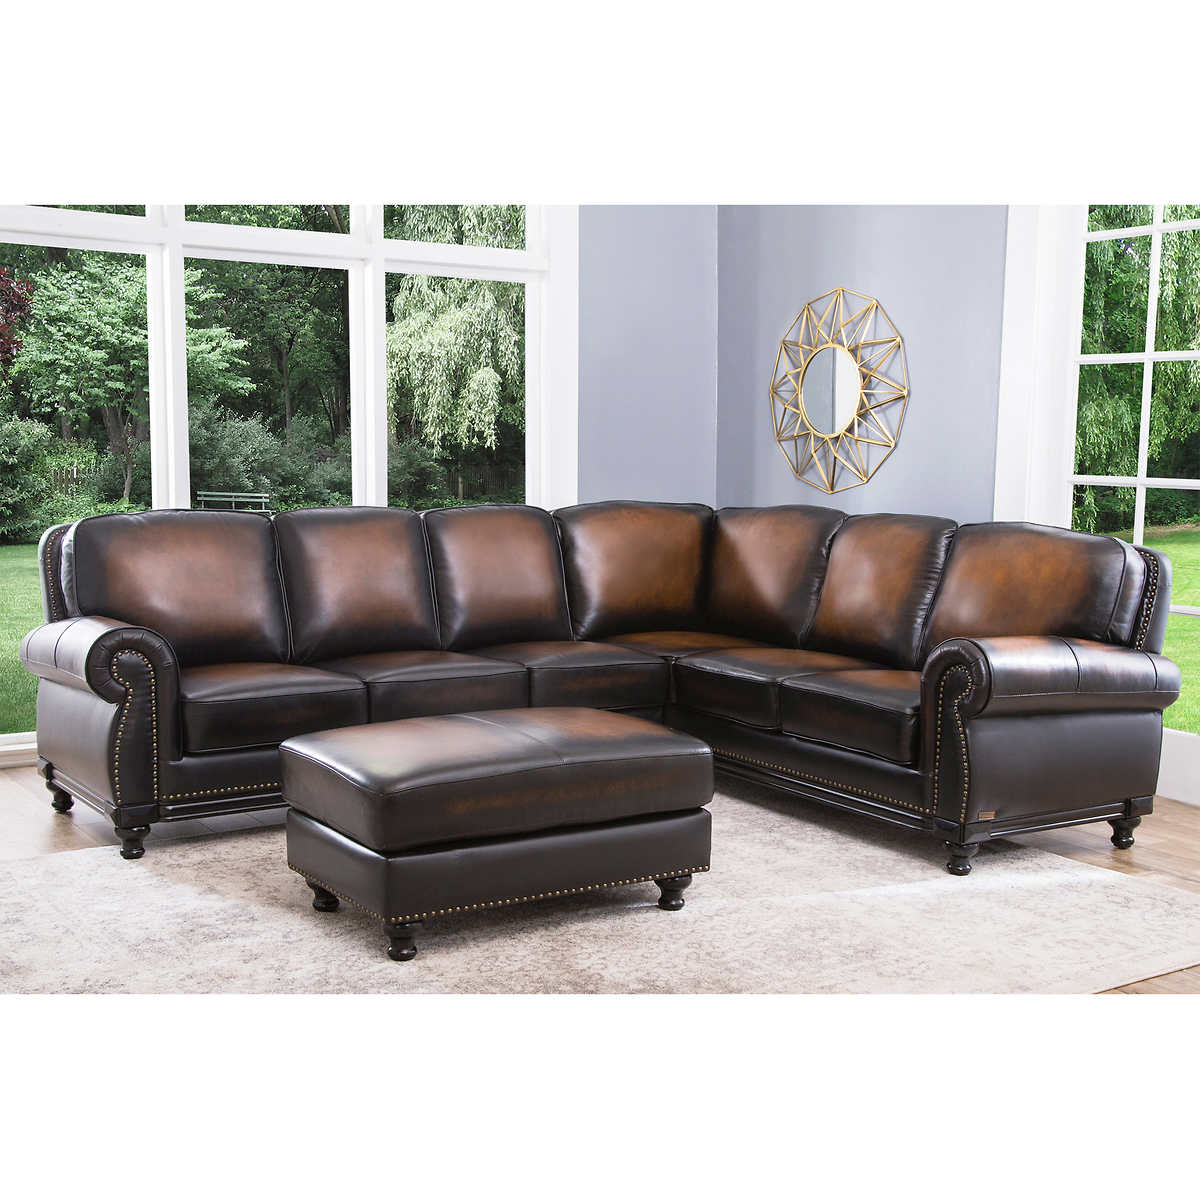 Leather Sofas Sectionals Costco